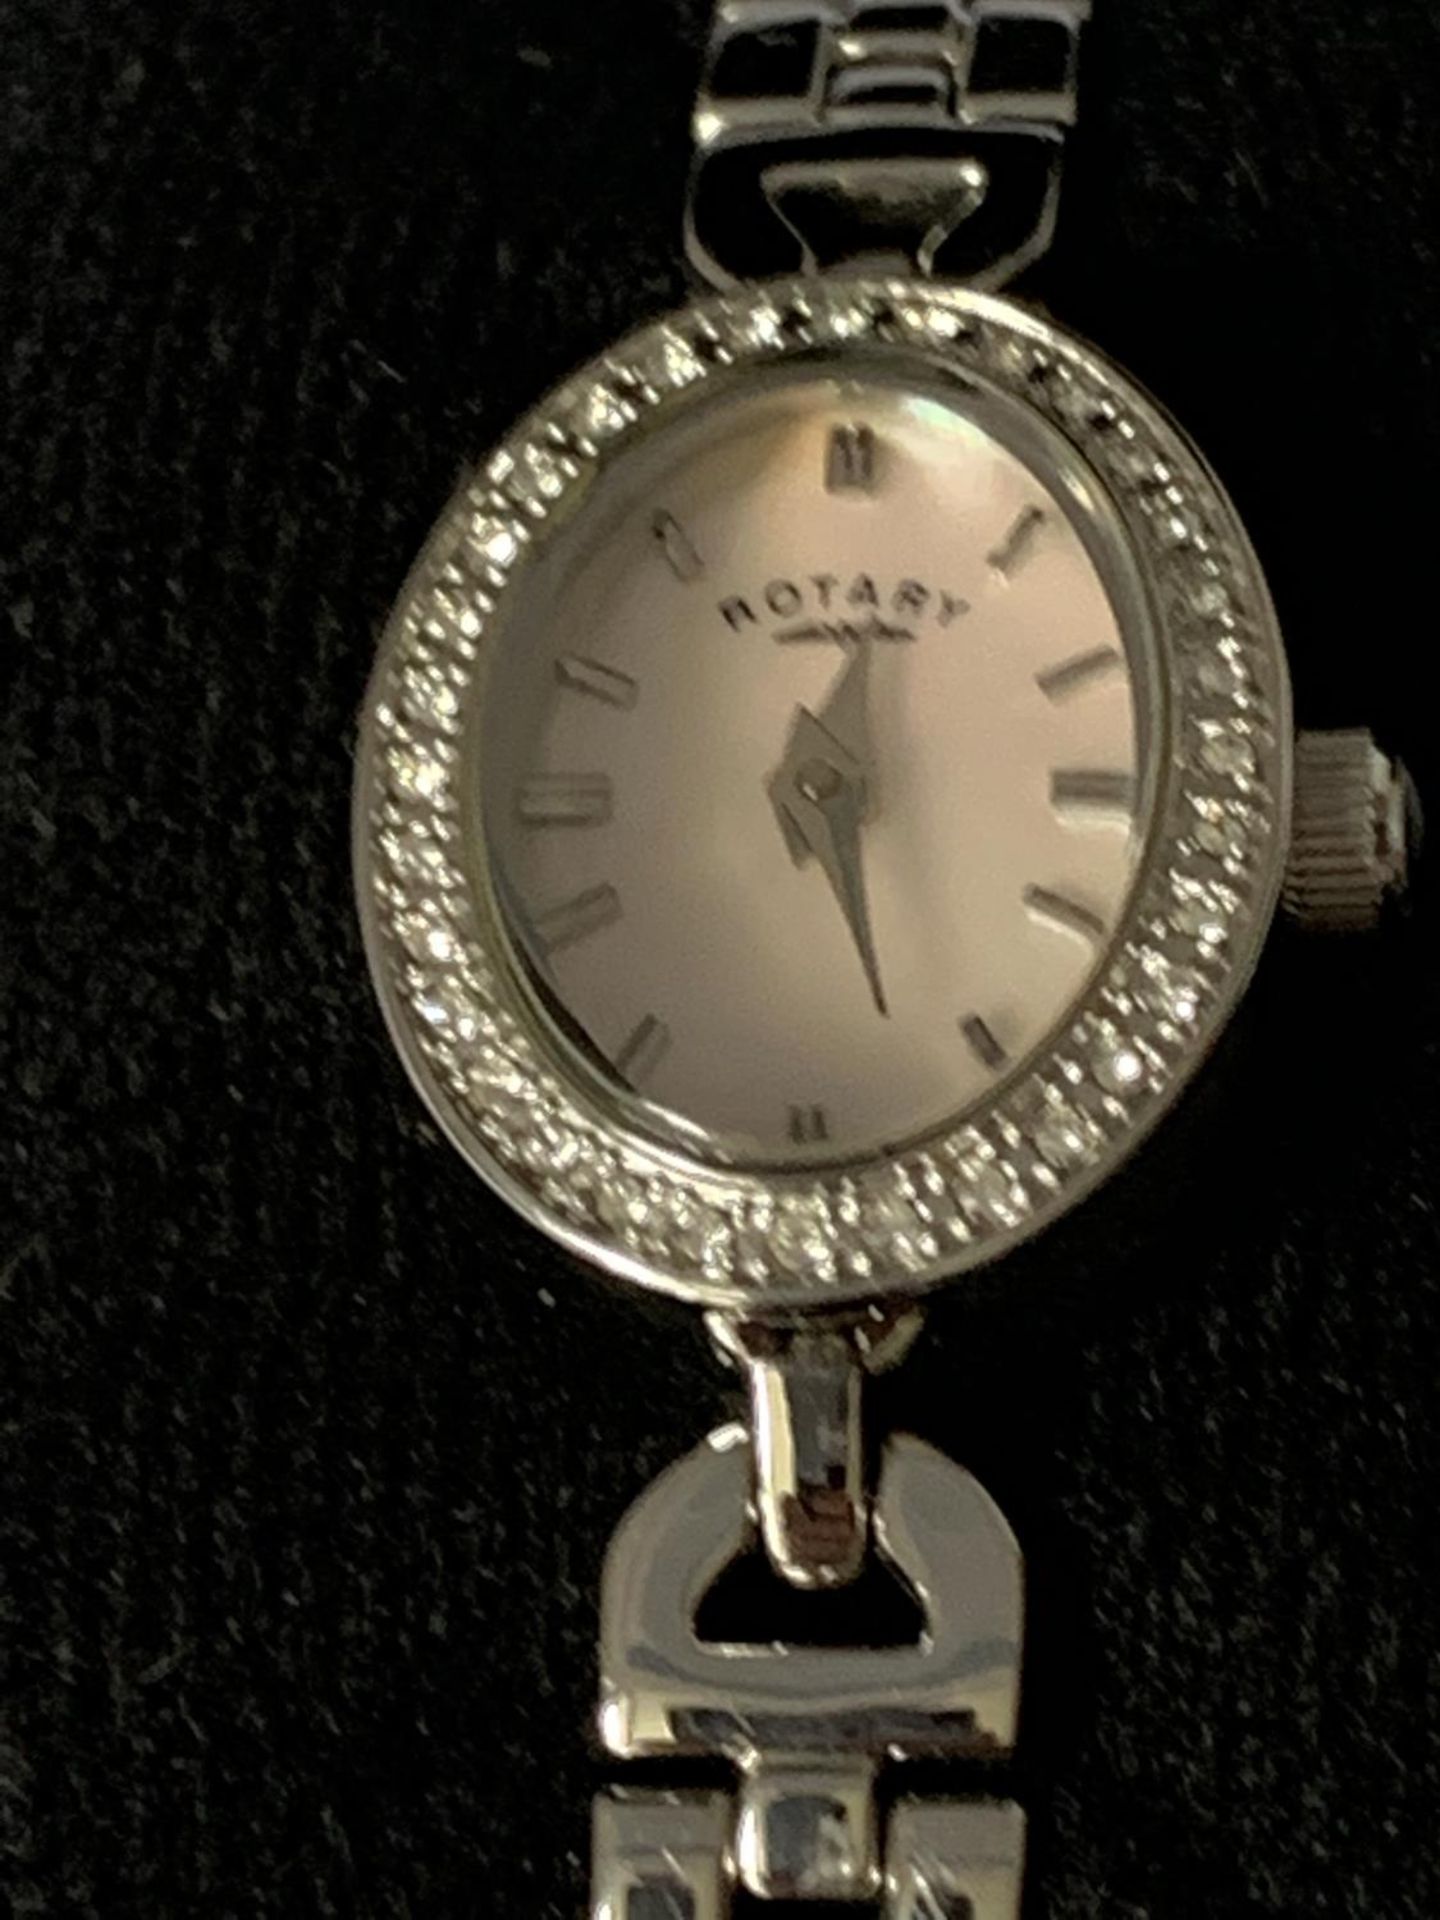 A ROTARY WRIST WATCH WITH PINK MOTHER OF PEARL OVAL FACE SURROUNDED BY CLEAR STONES - Image 2 of 3